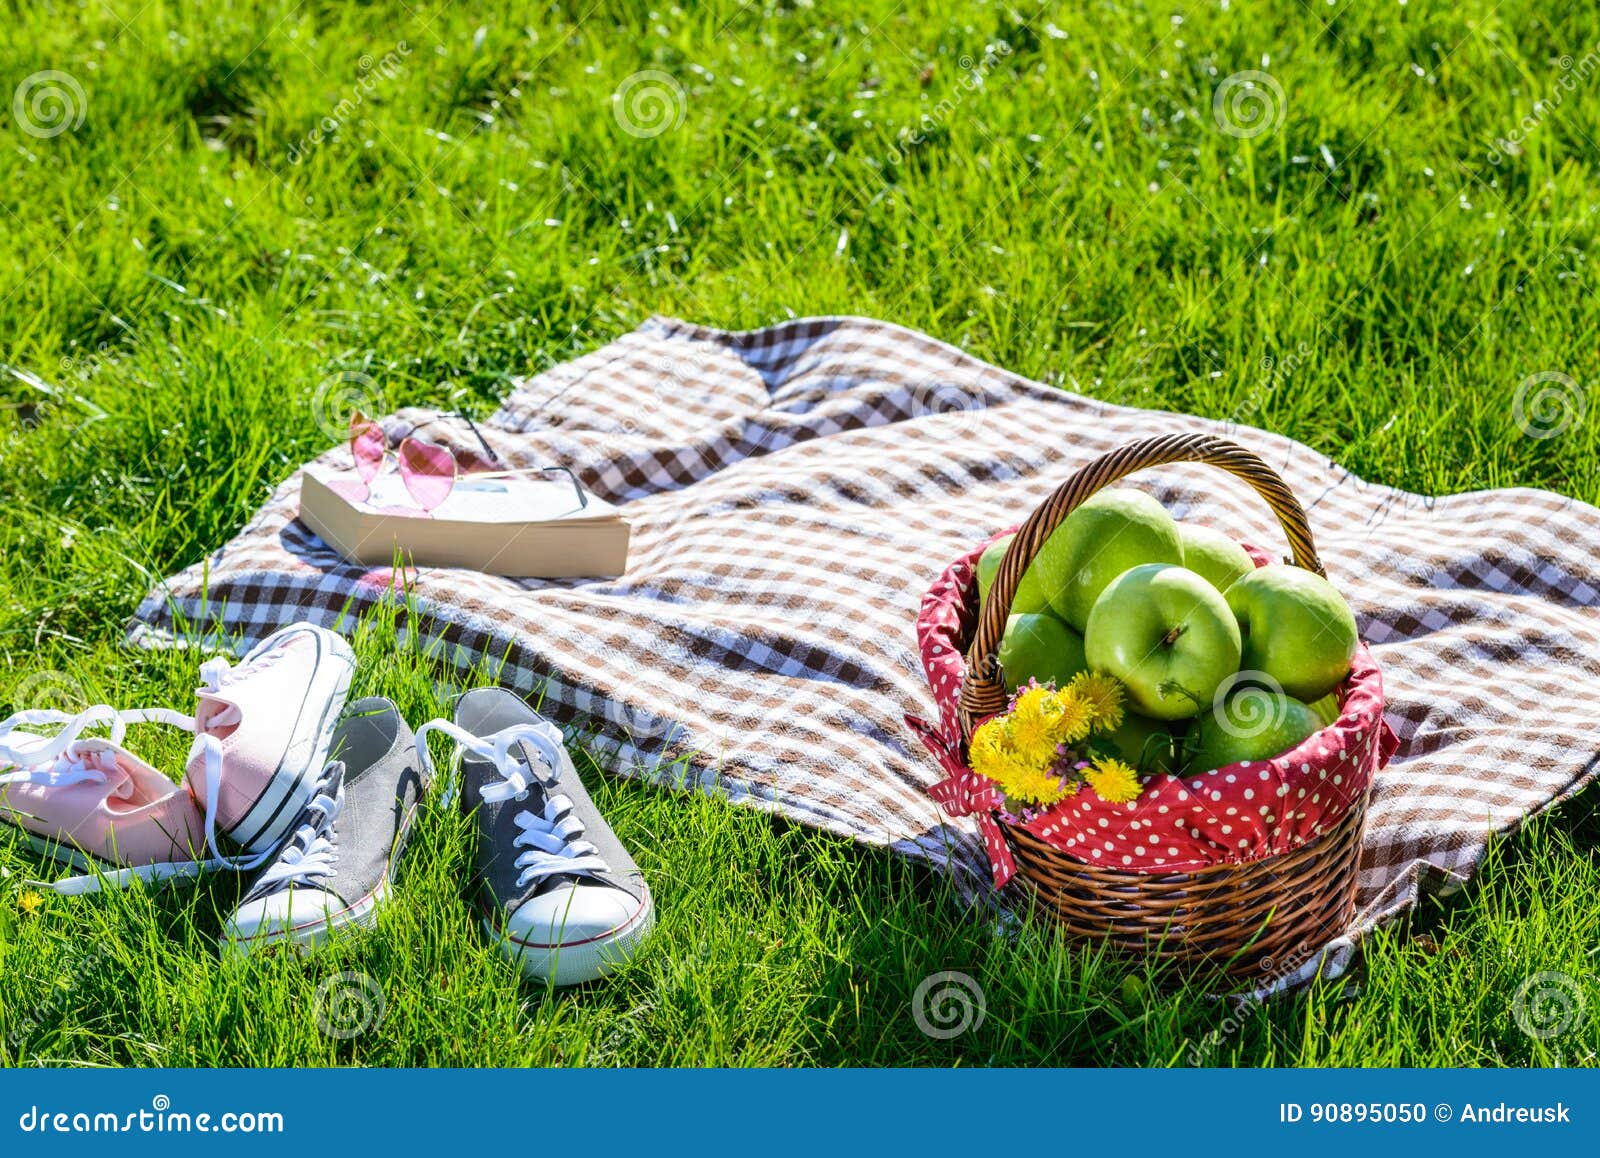 Picnic Basket And Blanket Stock Photo Image Of Park 90895050